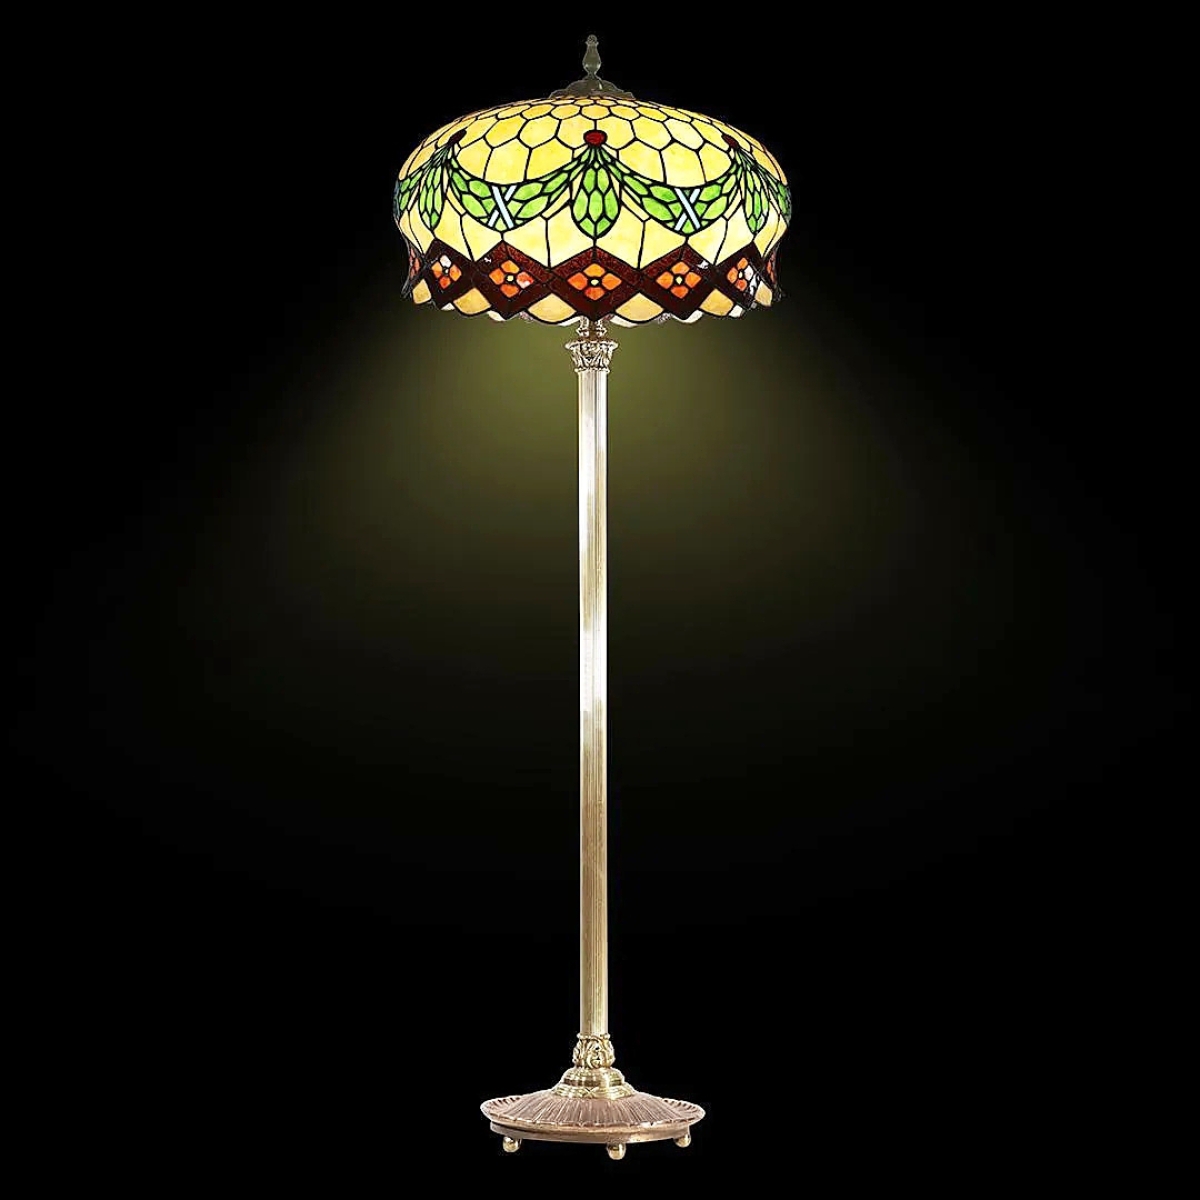 A “Drape” leaded glass floor lamp by Wilkinson brought a good result at $3,438.